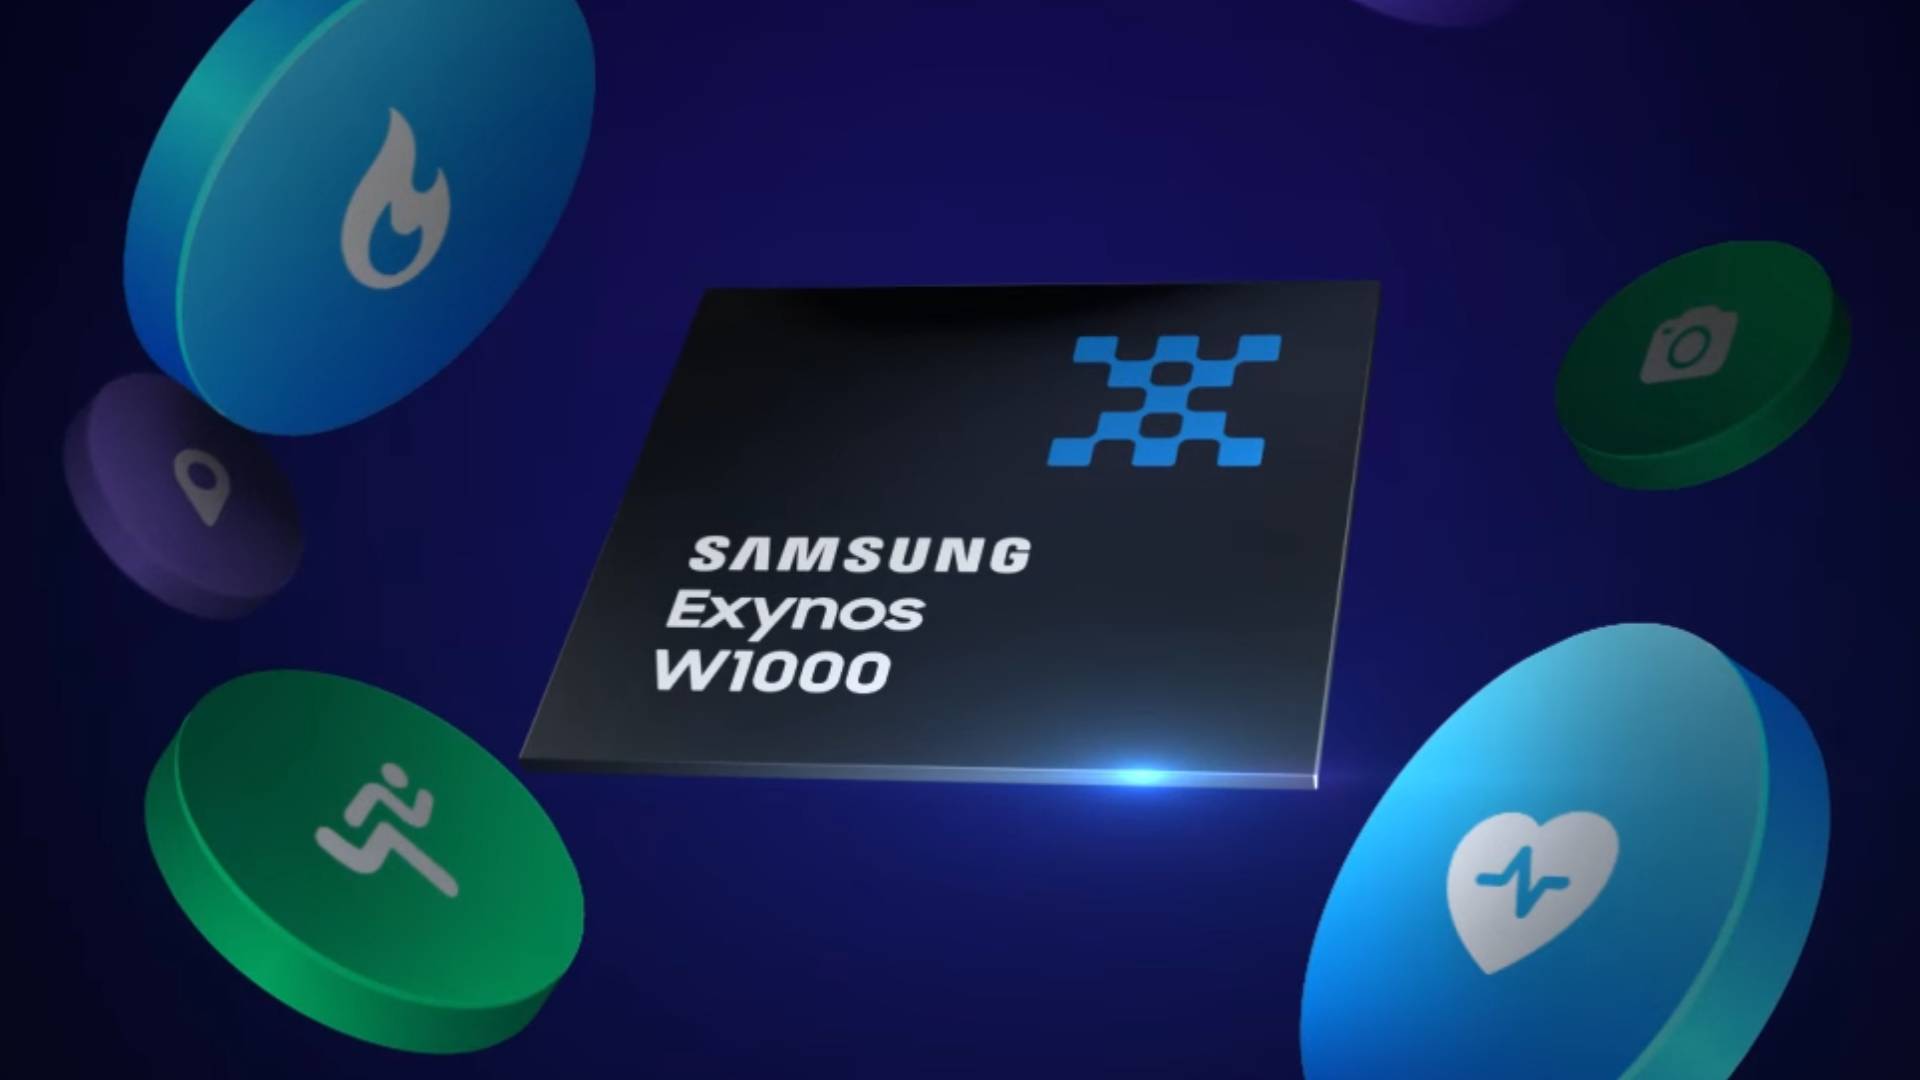 Official illustration of Samsung's W1000 chip.